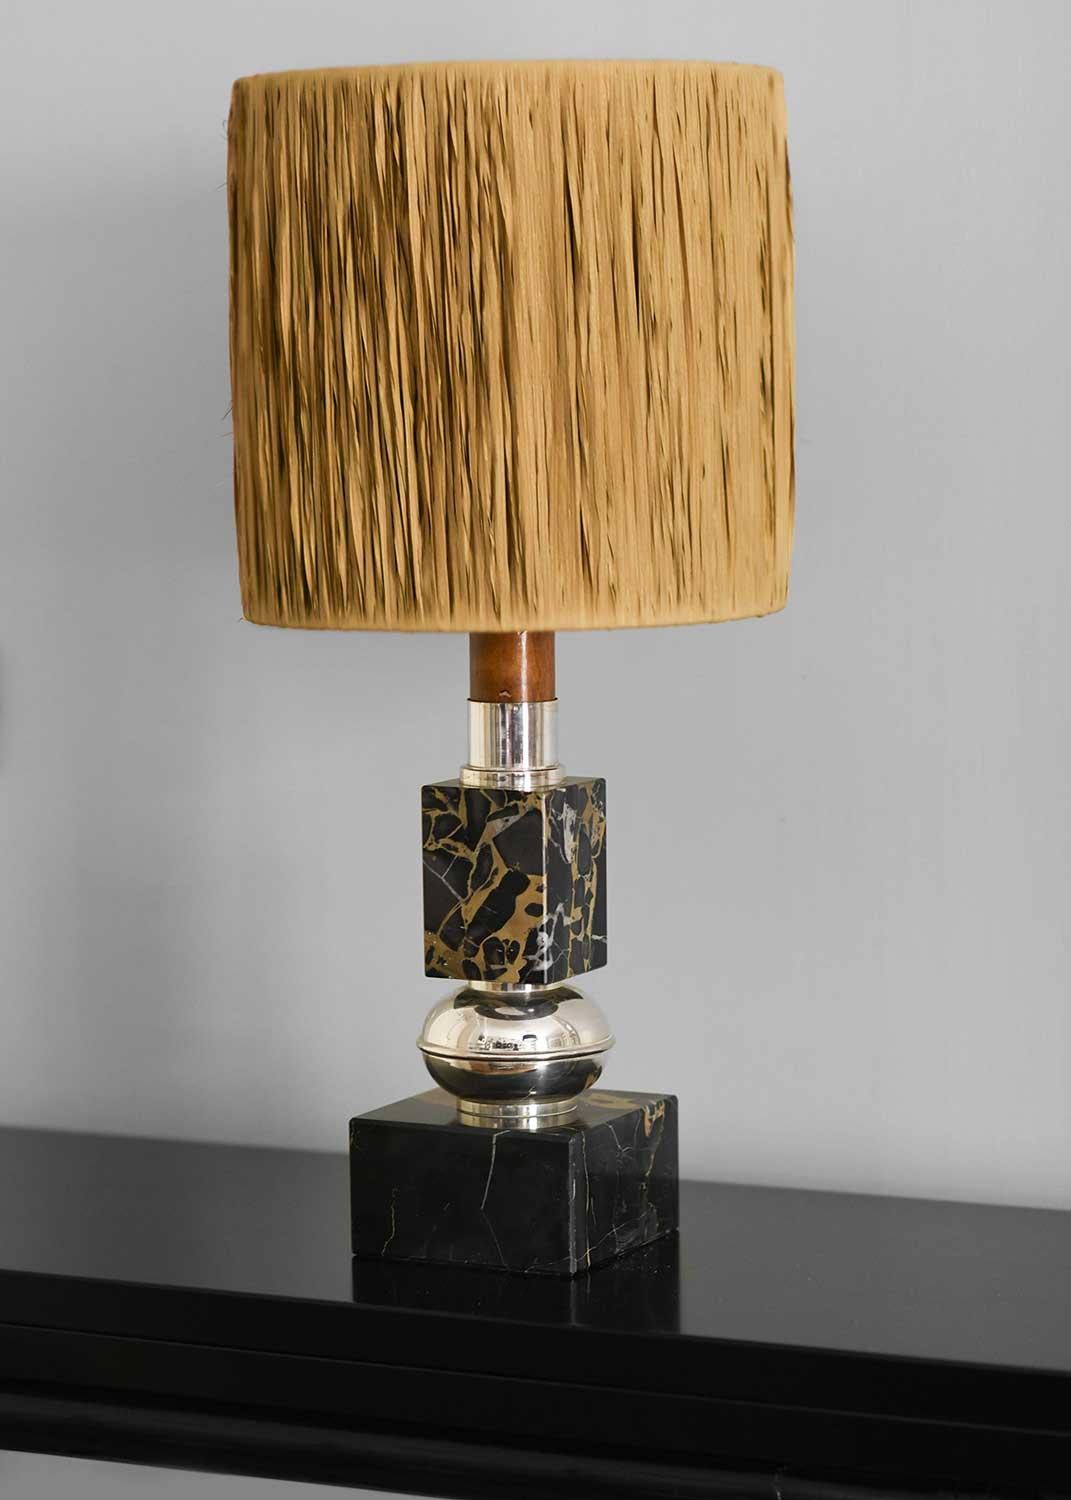 70s table lamp in brass and black marble with wooden detail. 
Complete with raffia lampshade
Product details
Dimensions: 28L x 70H x 28D cm
Italian production from the 70s.